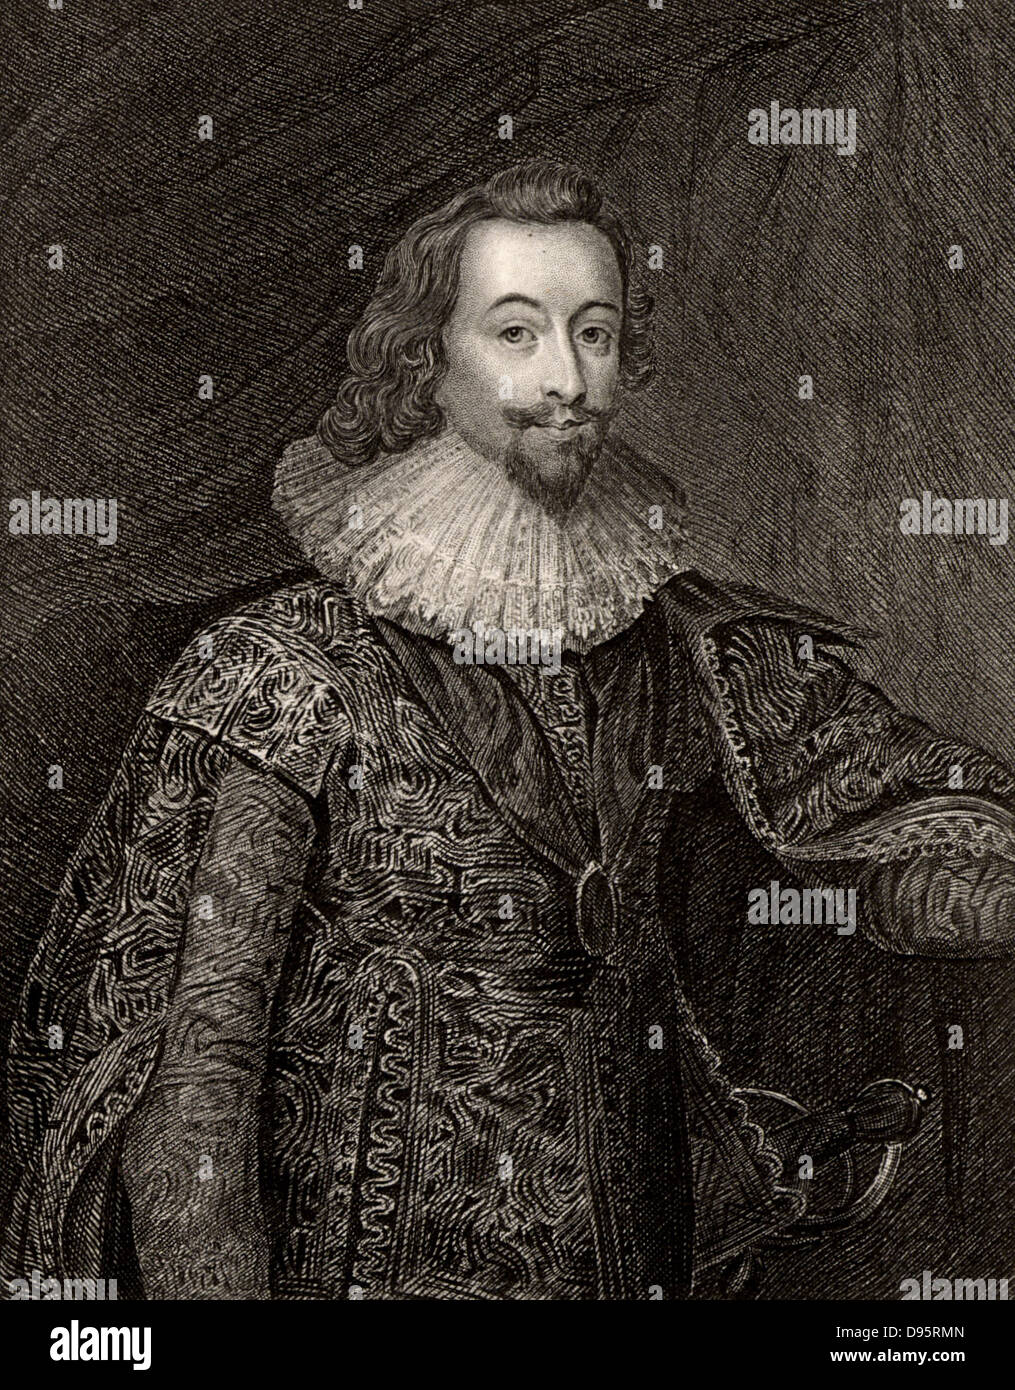 George Villiers, 1st Duke of Buckingham (1592-1628) English courtier; favourite of James I and Charles I.  Assassinated 23 August 1628.  Engraving. Stock Photo